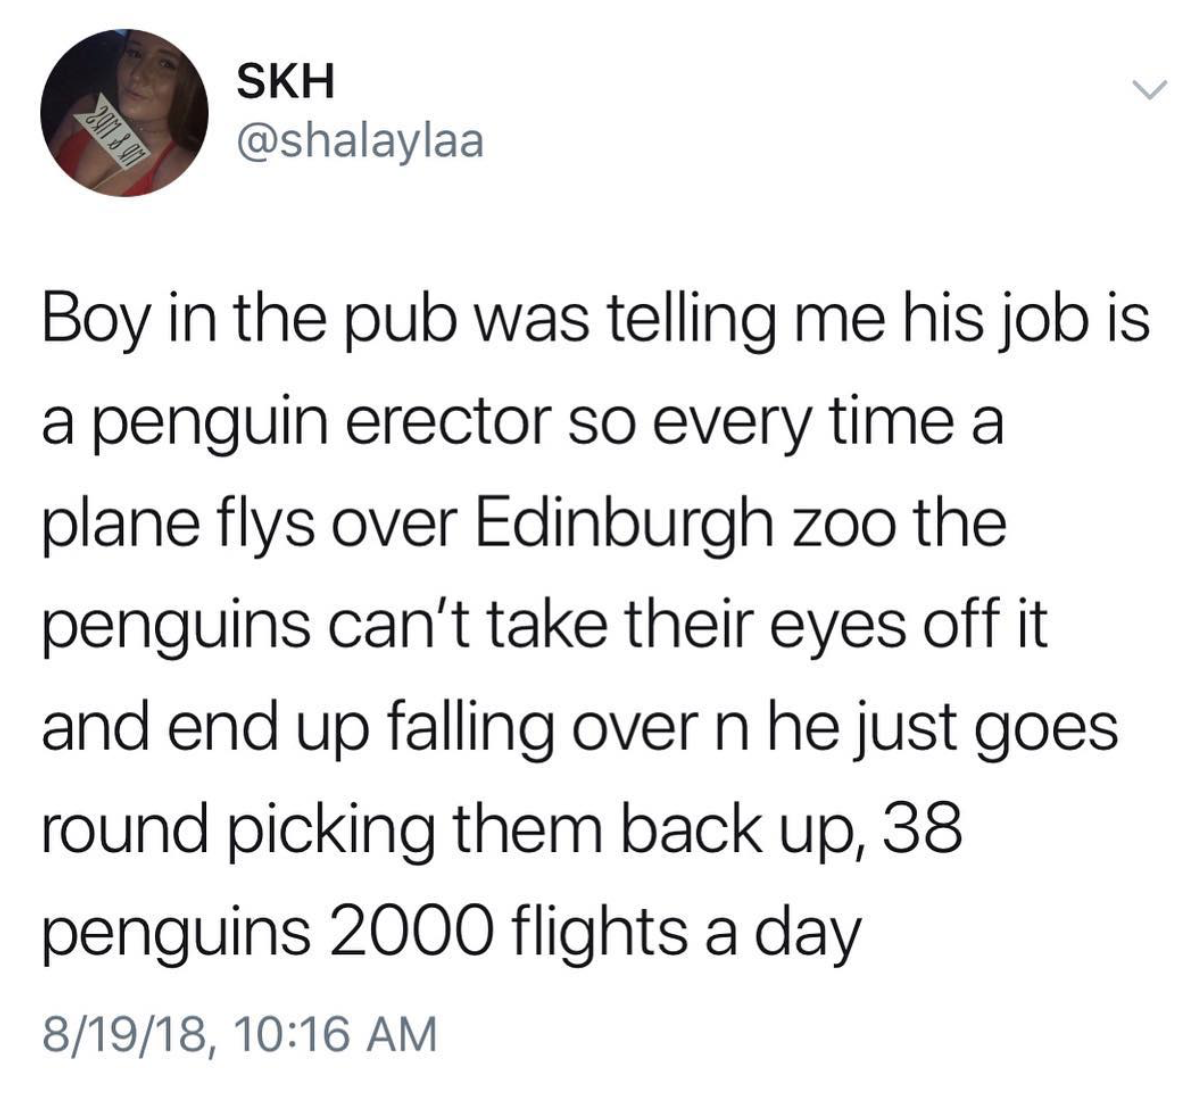 memes - we dating meme - Skh Boy in the pub was telling me his job is a penguin erector so every time a plane flys over Edinburgh zoo the penguins can't take their eyes off it and end up falling over n he just goes round picking them back up, 38 penguins 